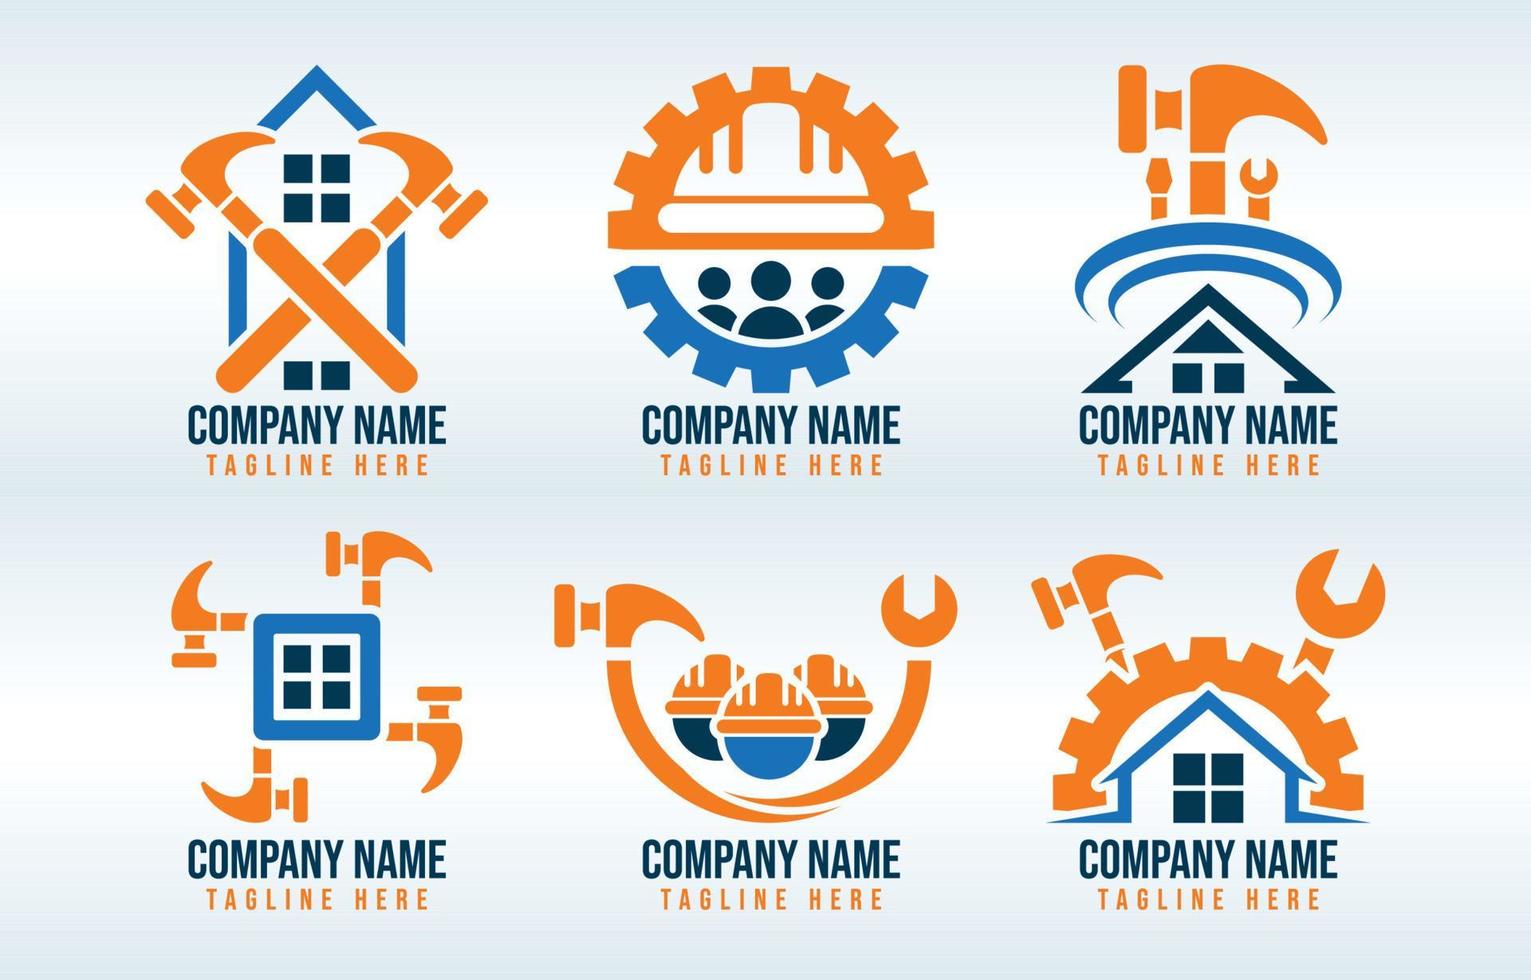 Many Kinds of Construction Equipment and Workers Logo vector